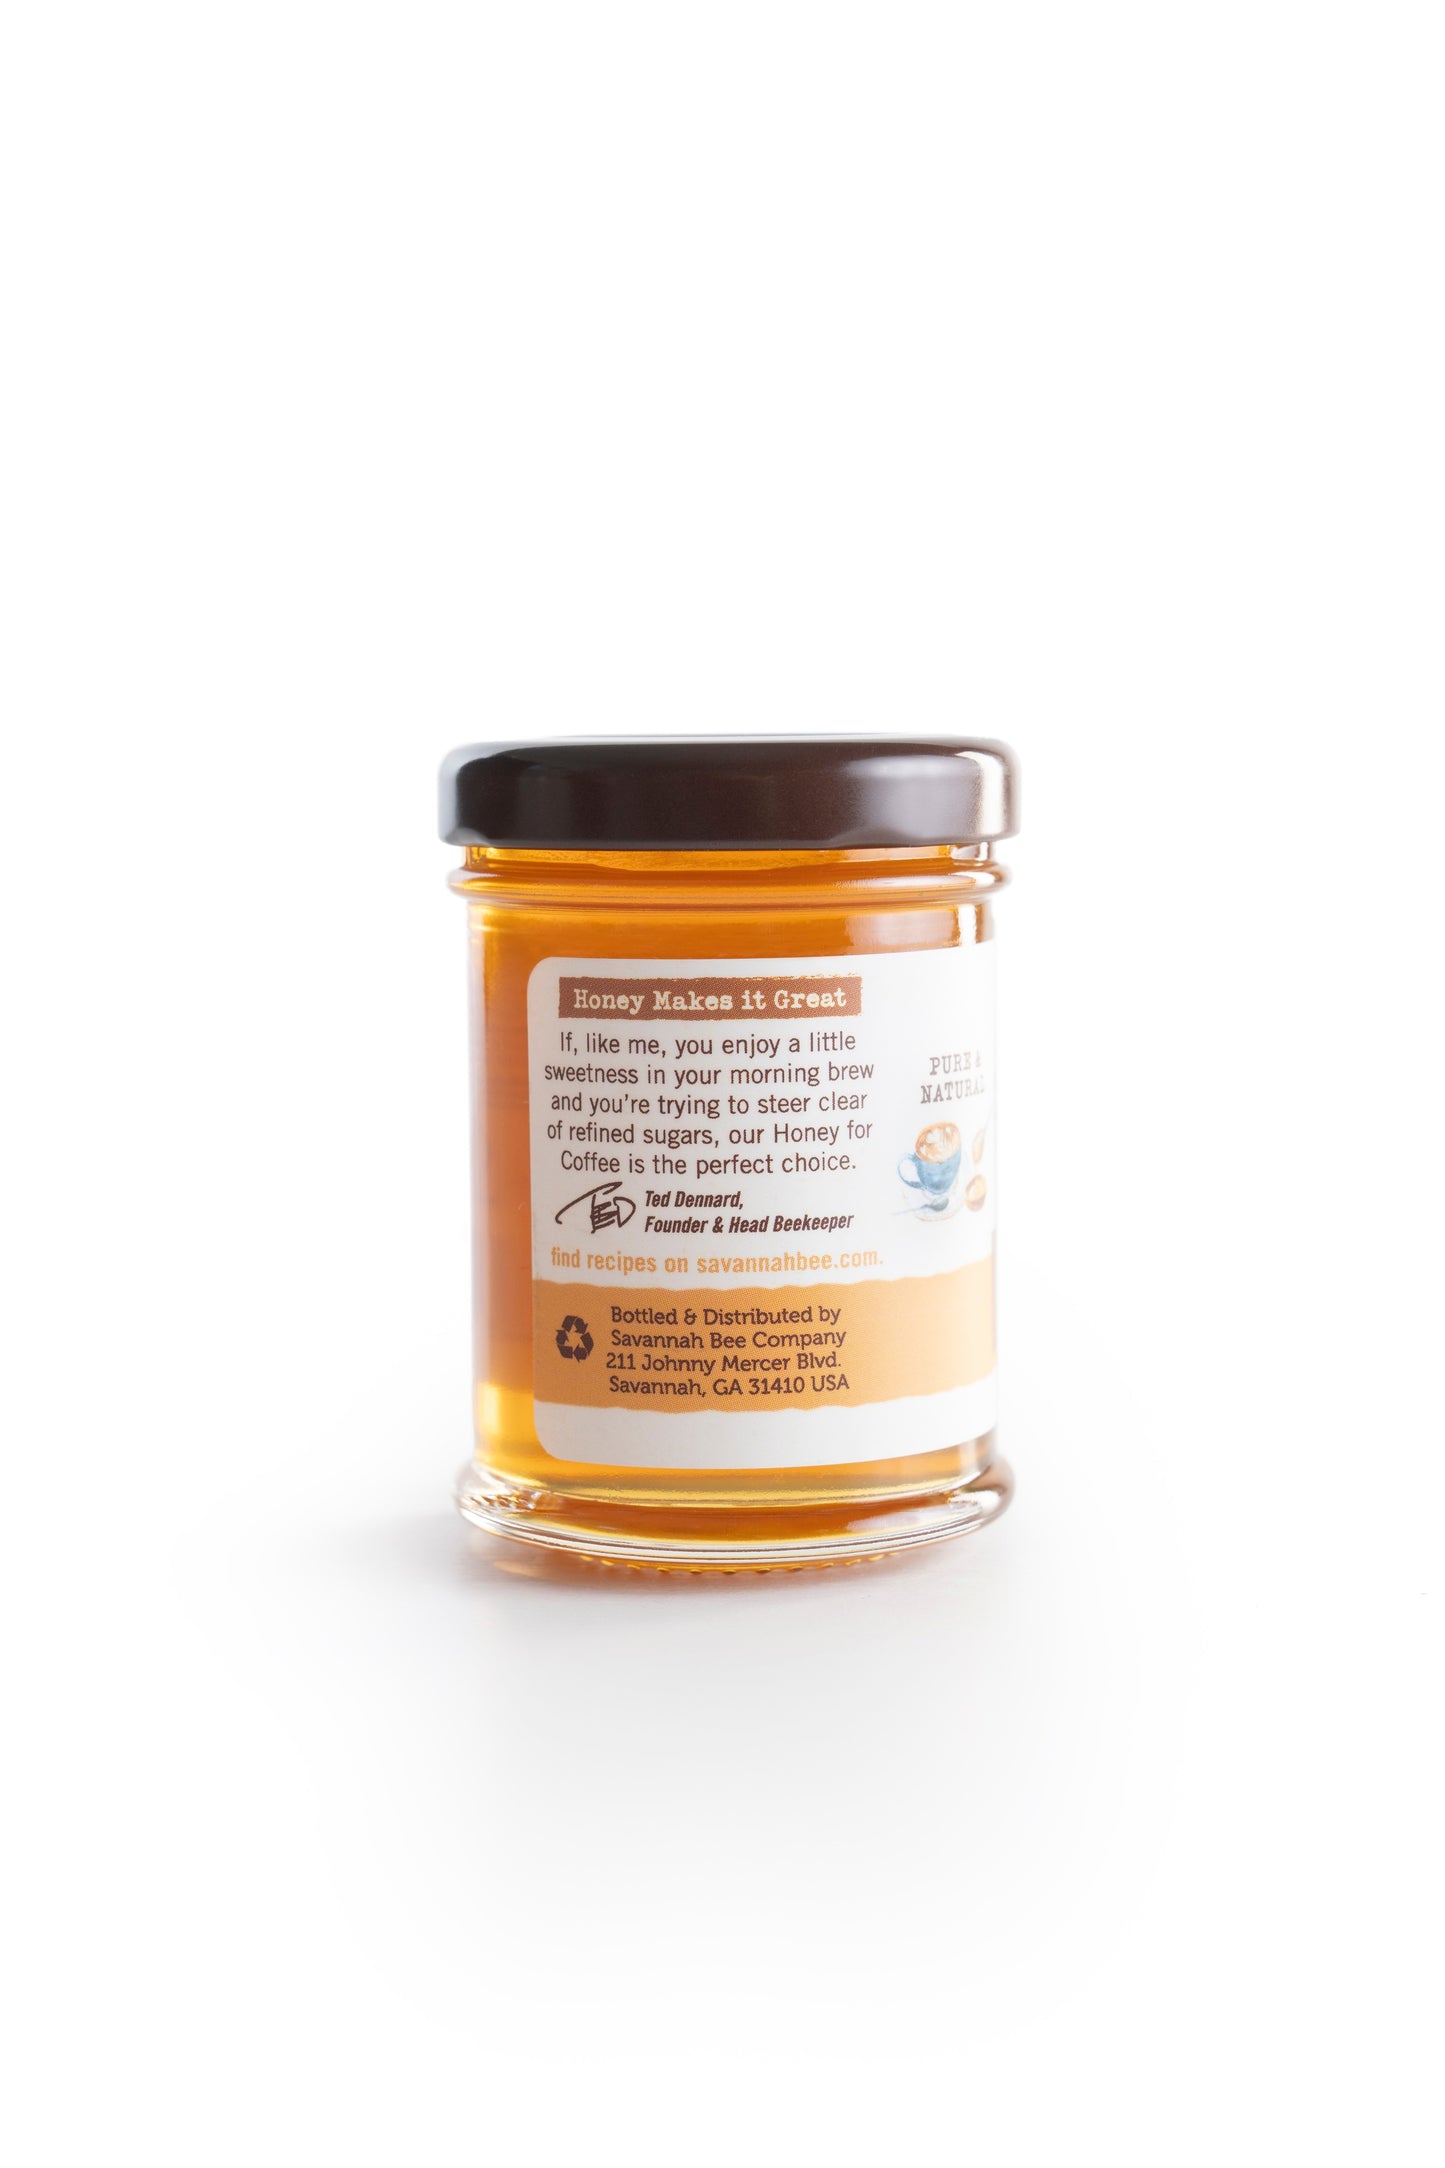 3 ounce honey for coffee in a glass jar side view on a white background